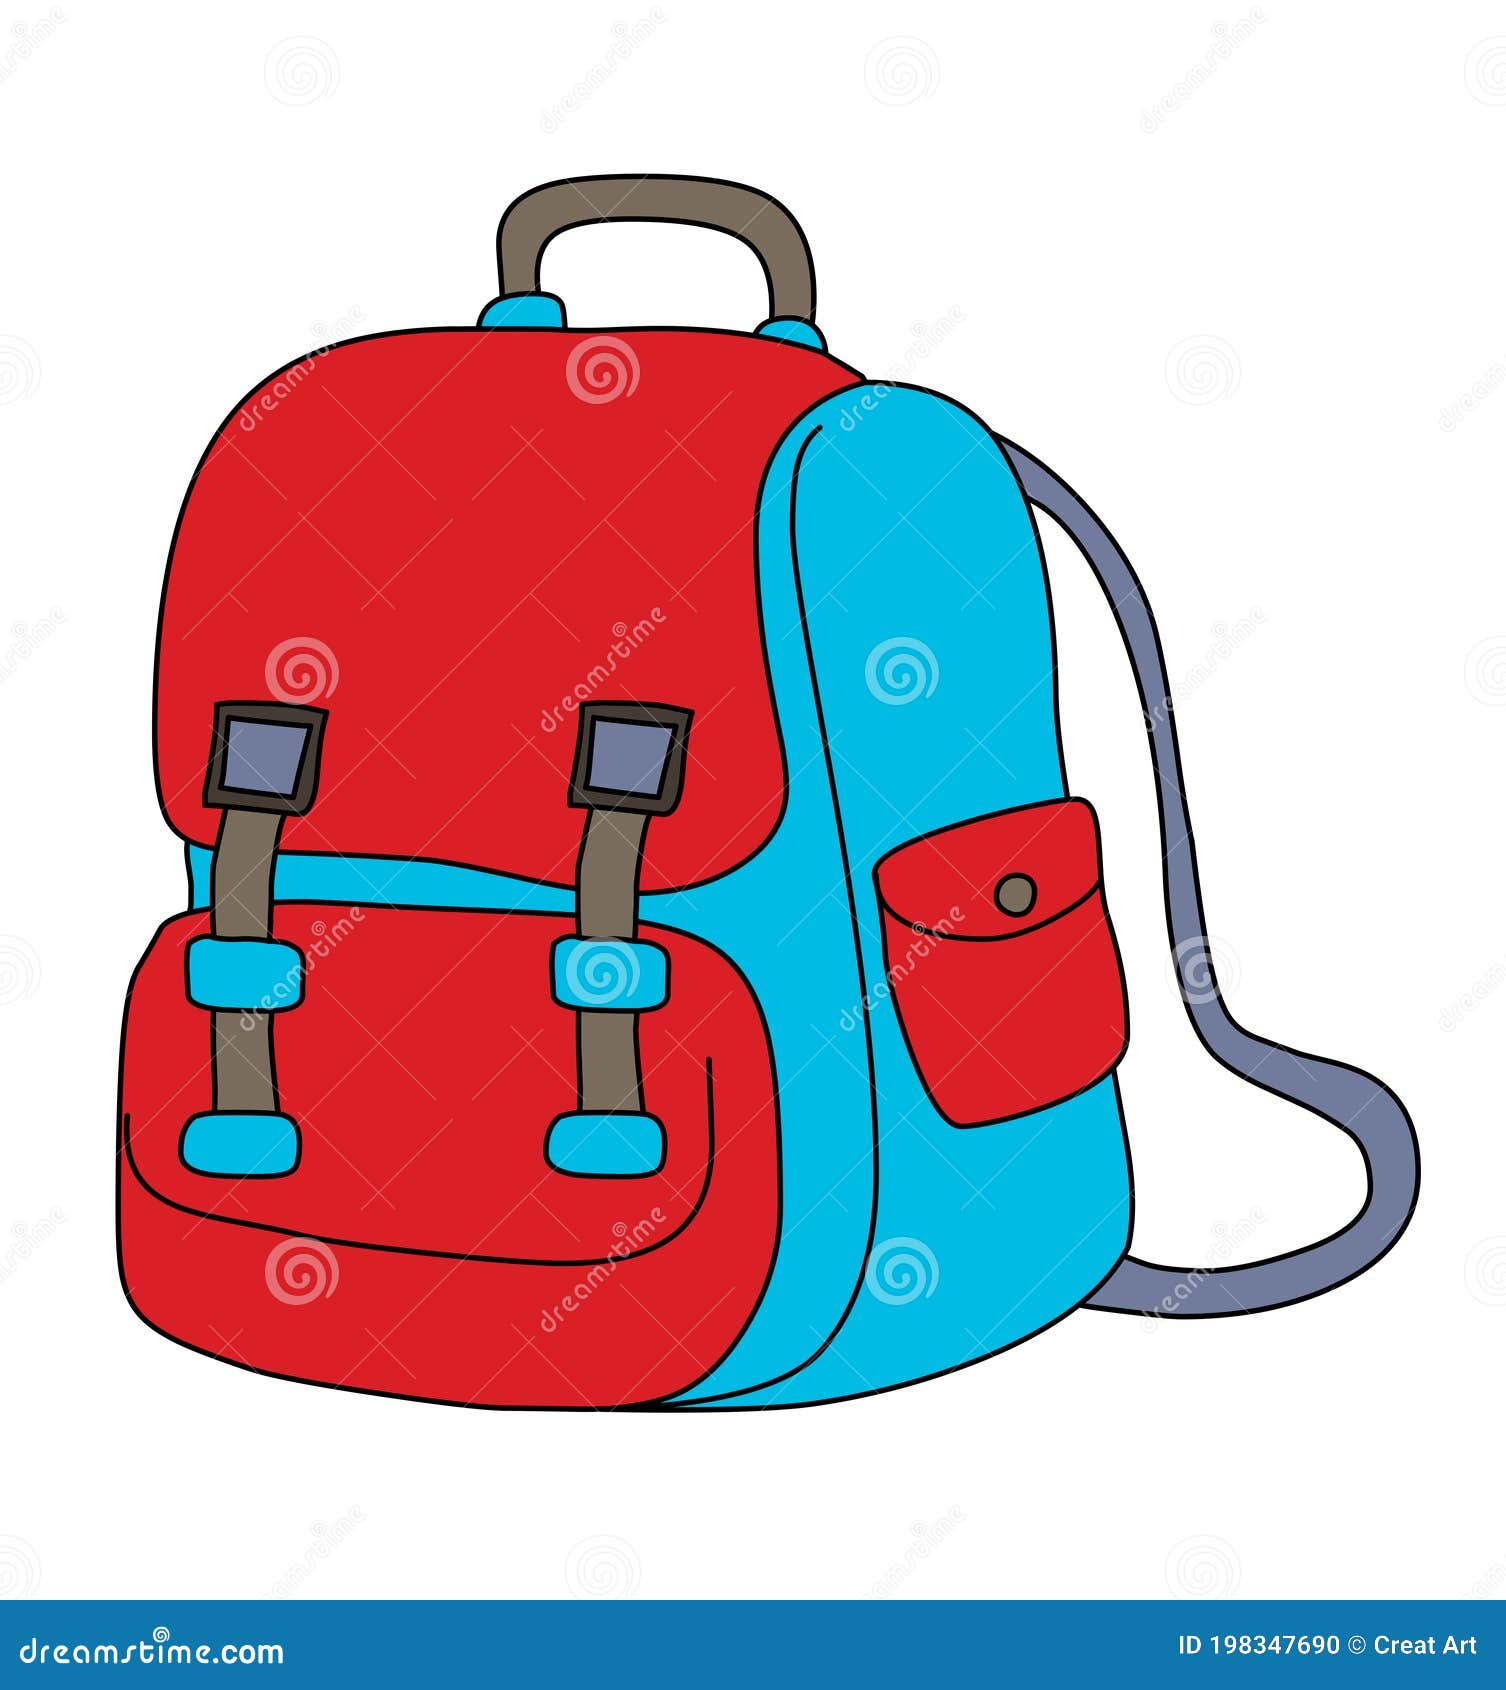 School Backpack Stock Vector Illustration and Royalty Free School Backpack  Clipart